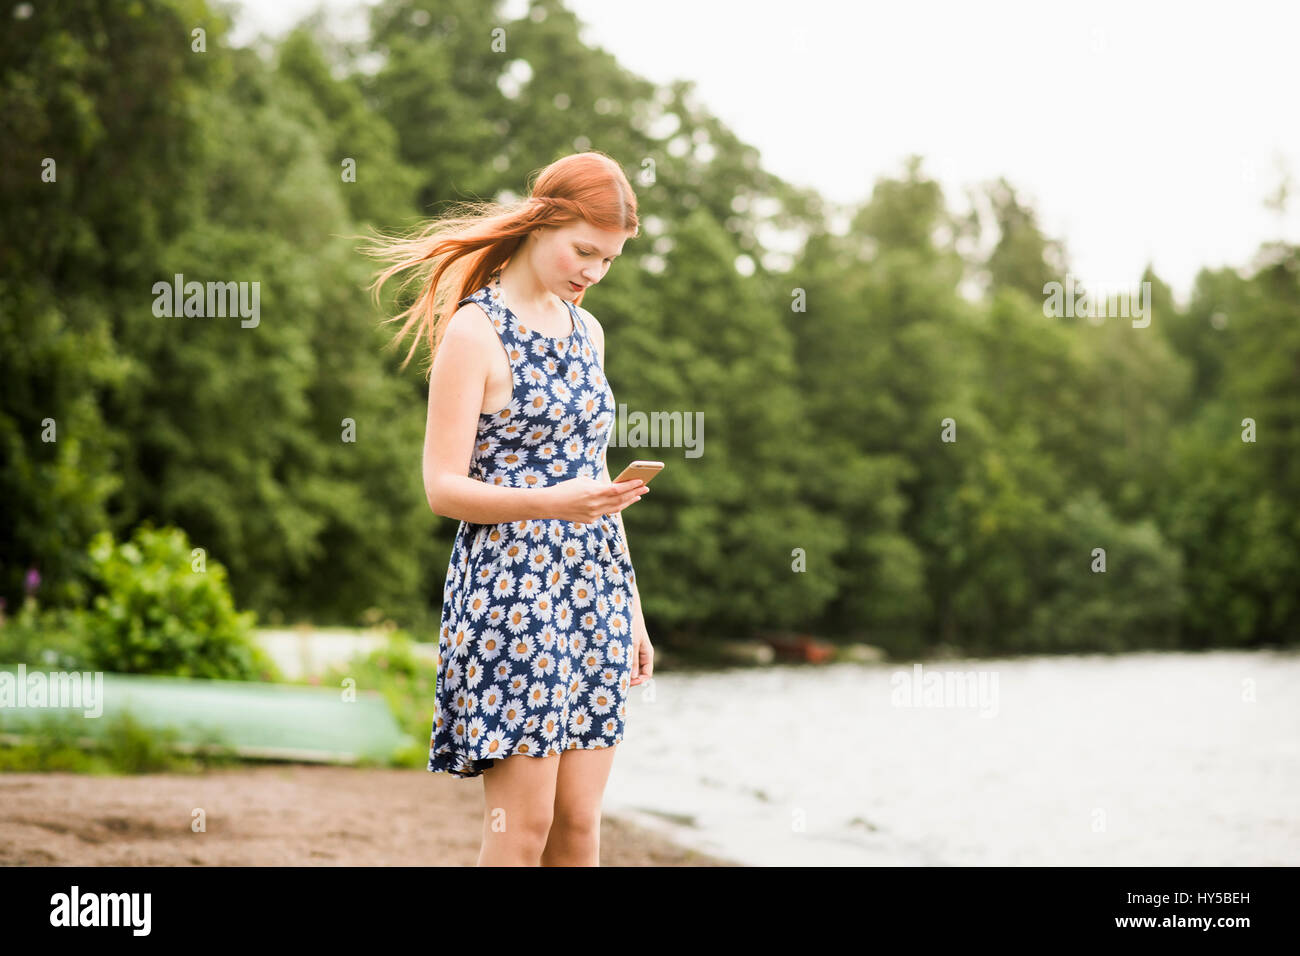 Finland, Pirkanmaa, Tampere, Woman with mobile phone standing on beach Stock Photo